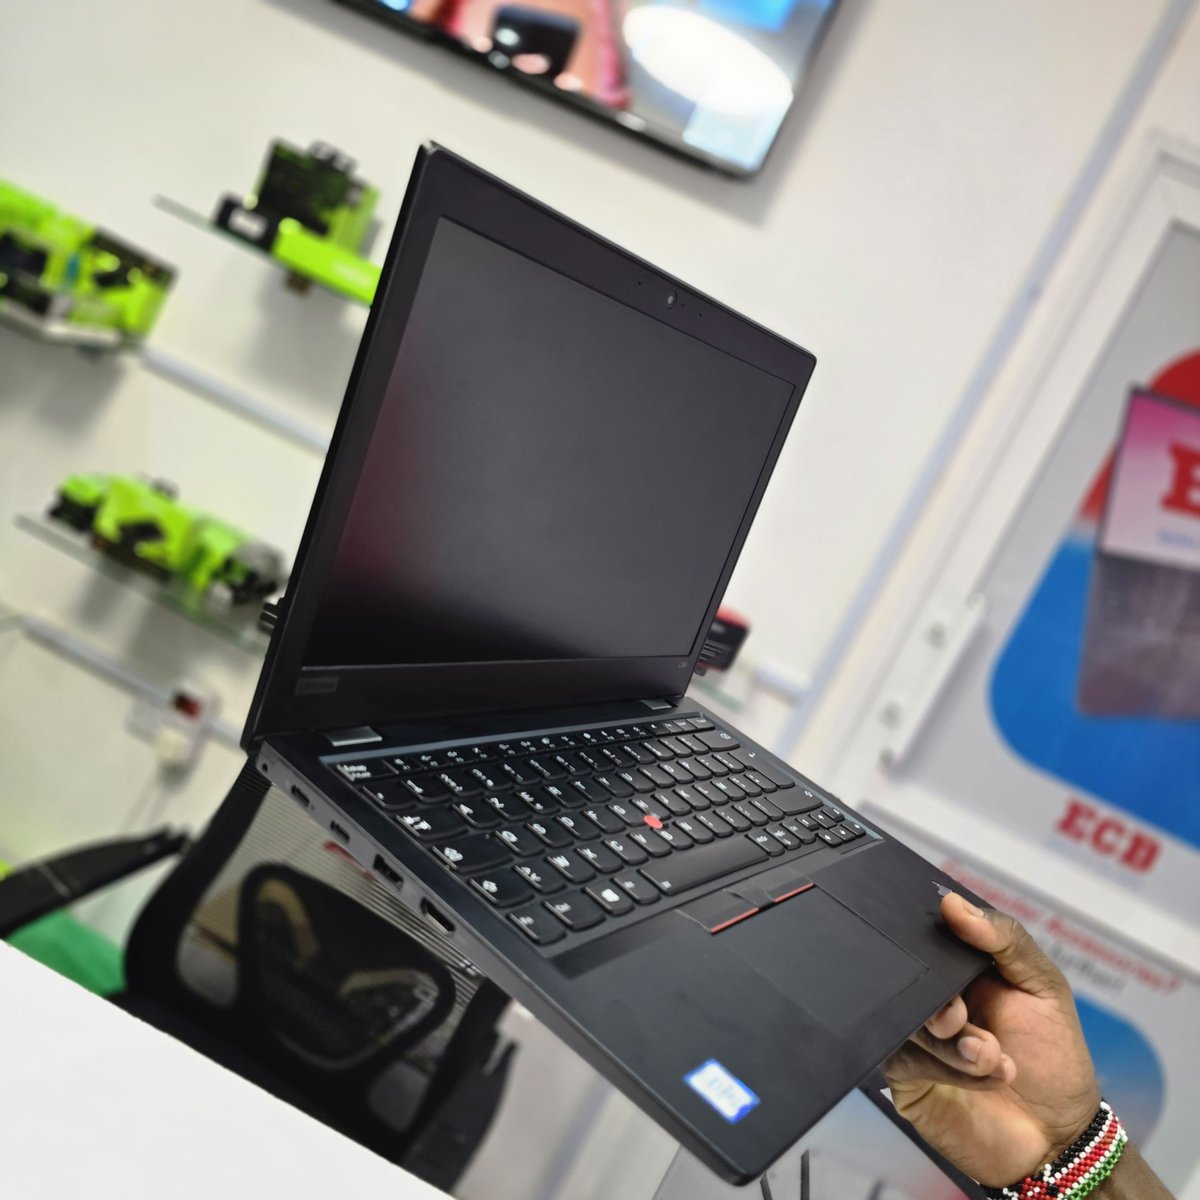 🔹️Lenovo Thinkpad L390 
8th Generation

Beneath the casing the L390 has an Intel core i5 processor Speed upto 3.8ghz ensuring the performance is unmatched. Comes with the  upgradable storage of 256 gb SSD which can be upgraded any time also has a Ram of 8gb ram 

Durability of…